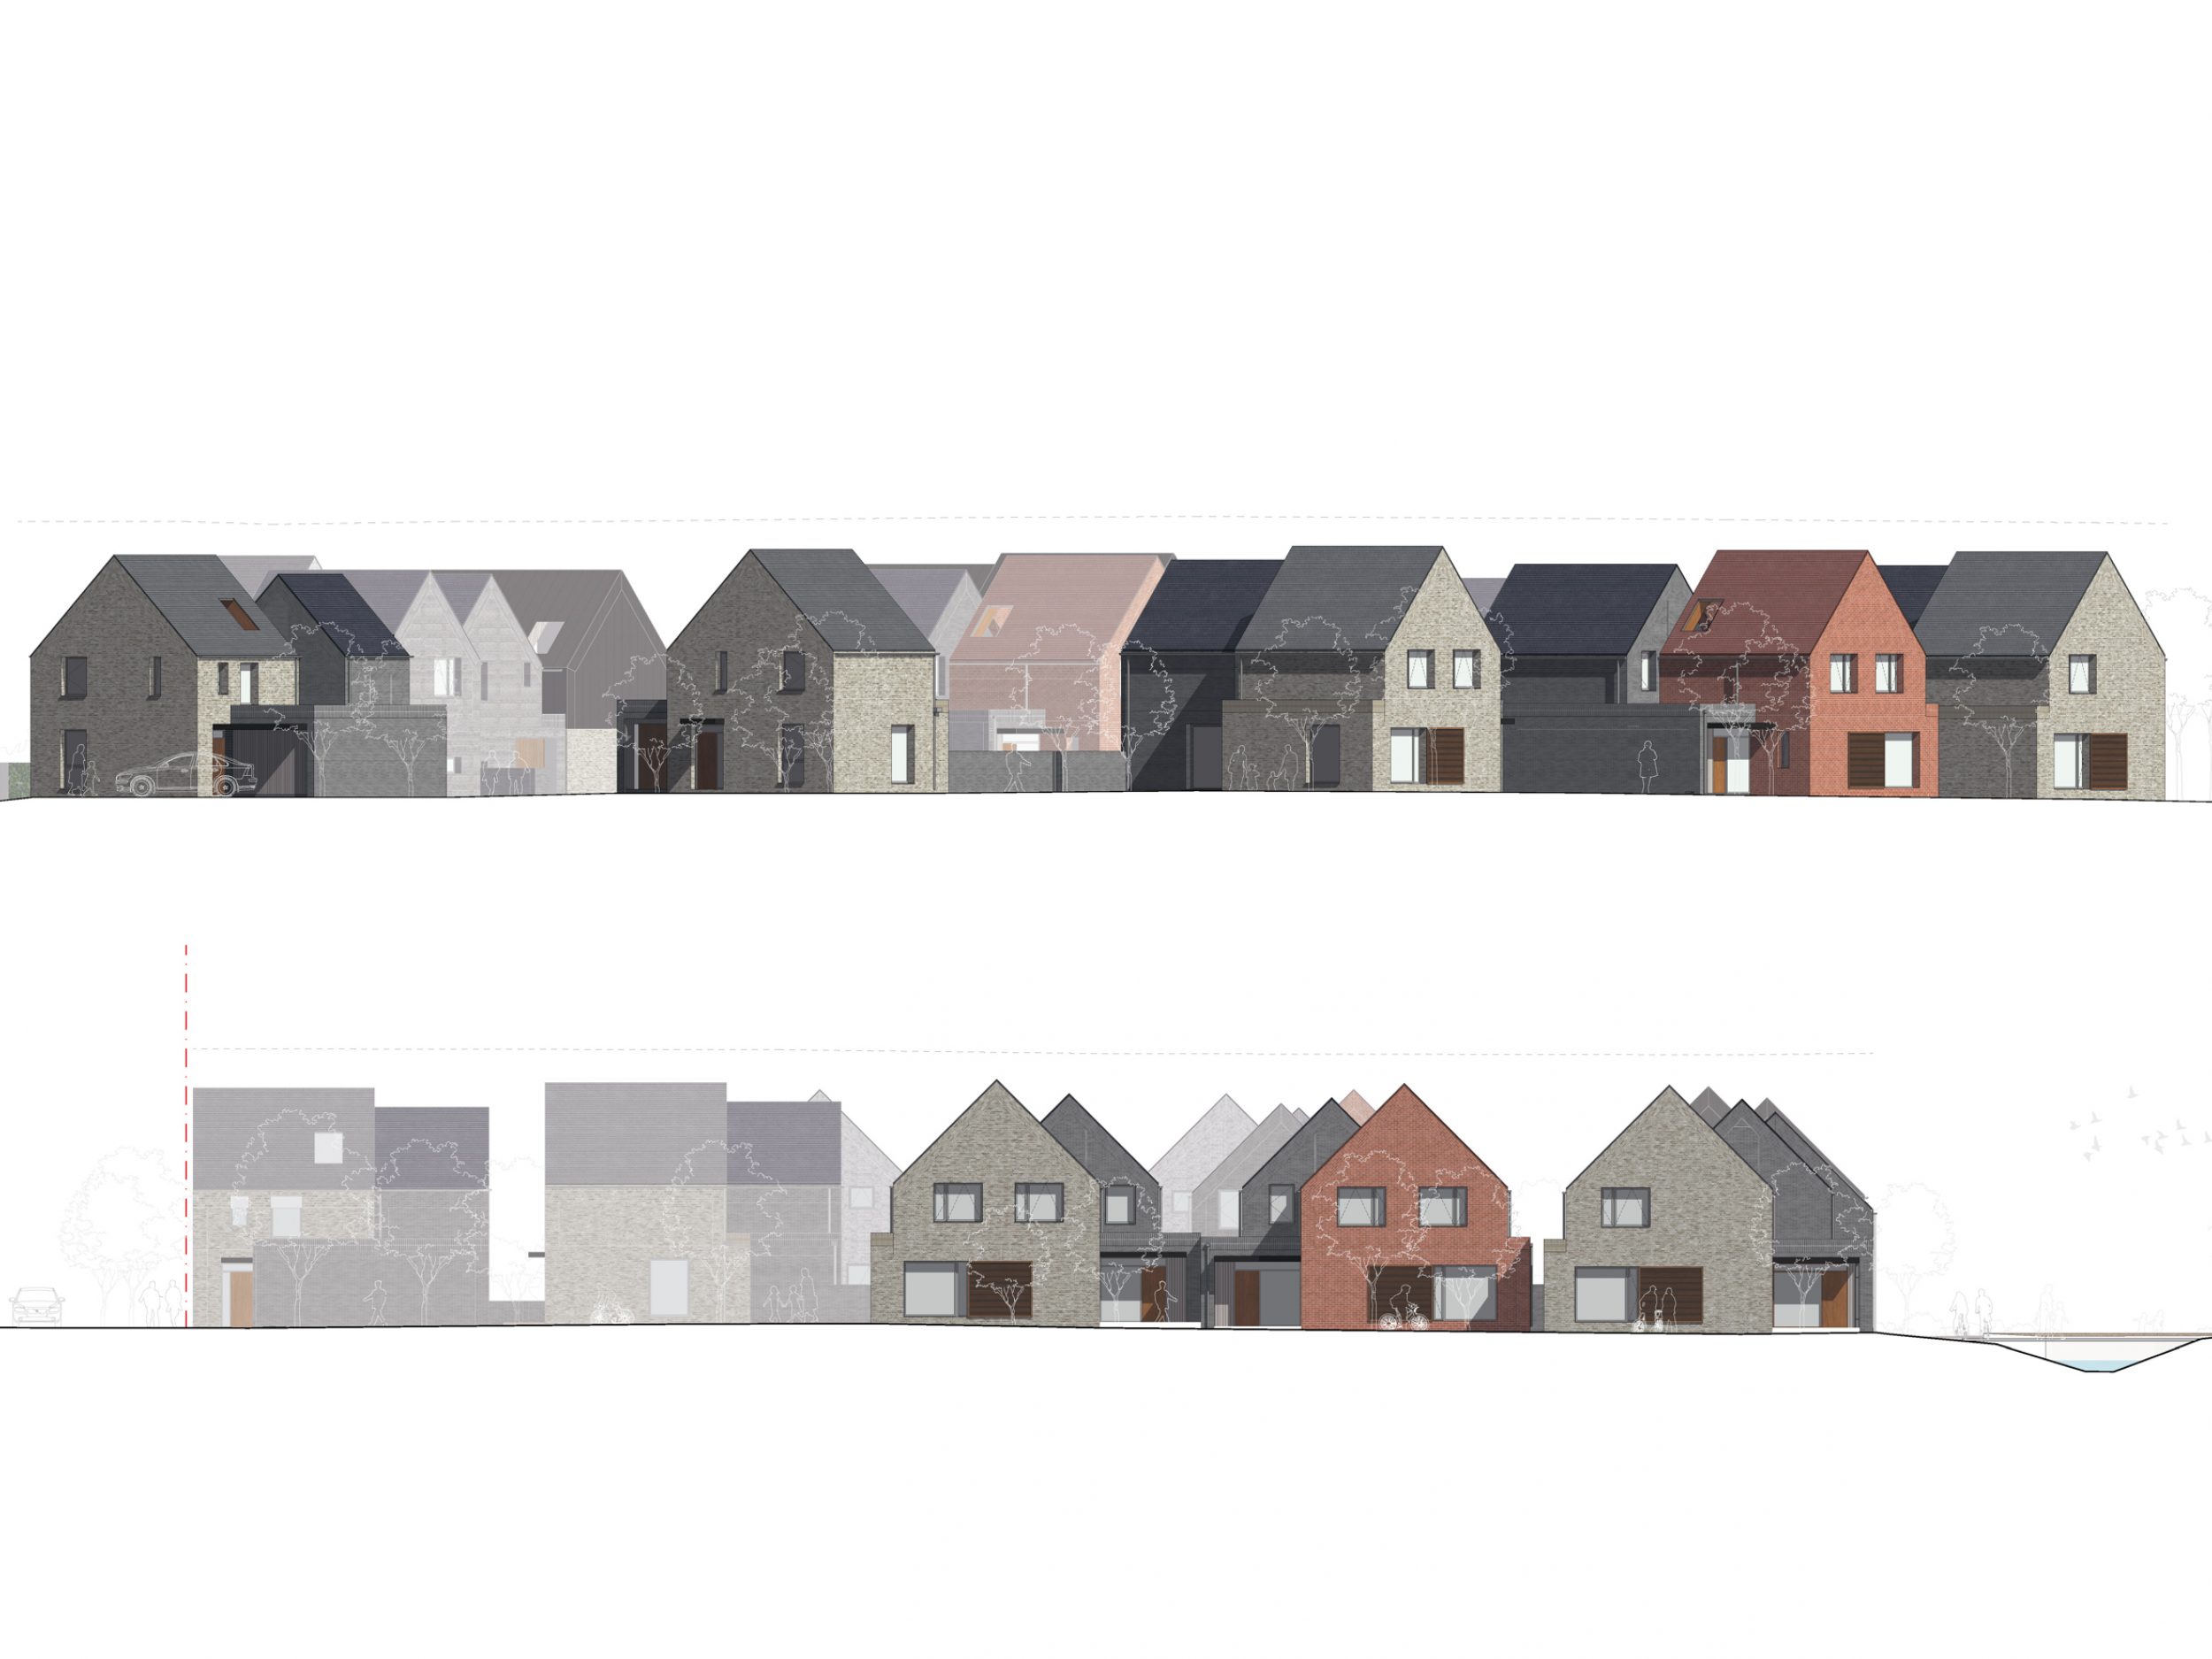 Elevation of all Woodland Villas housing projects, by CDC studios